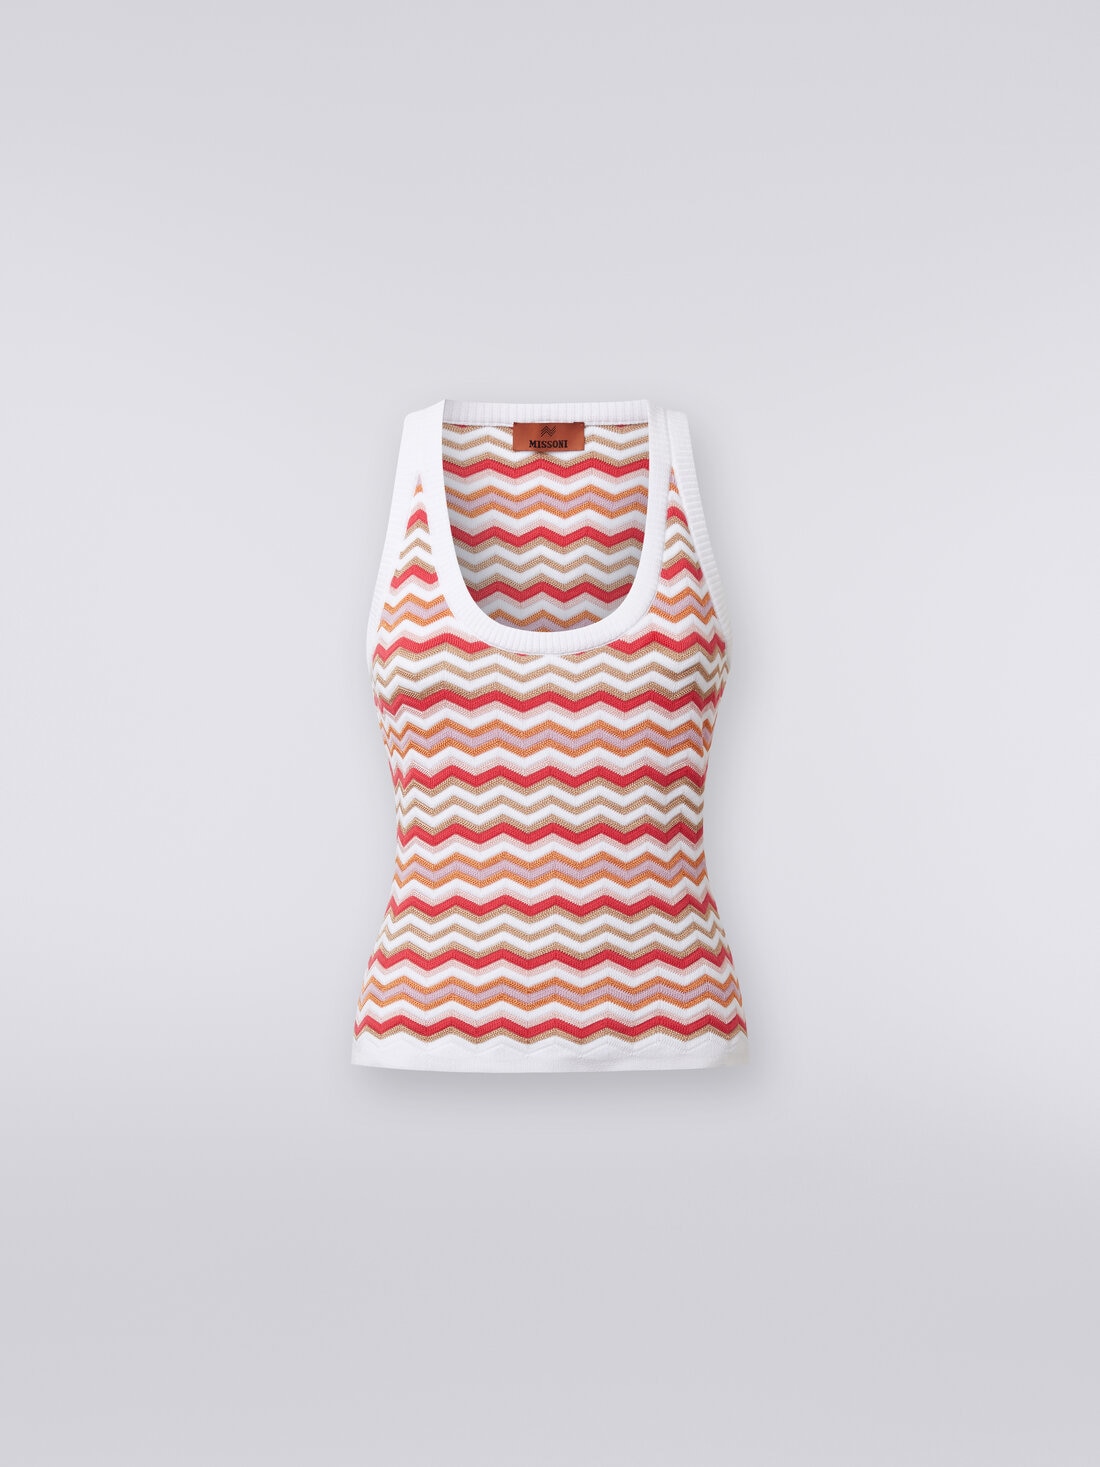 Tank top in zigzag viscose and cotton knit, Multicoloured  - DS24SK10BK034FSM9AN - 0